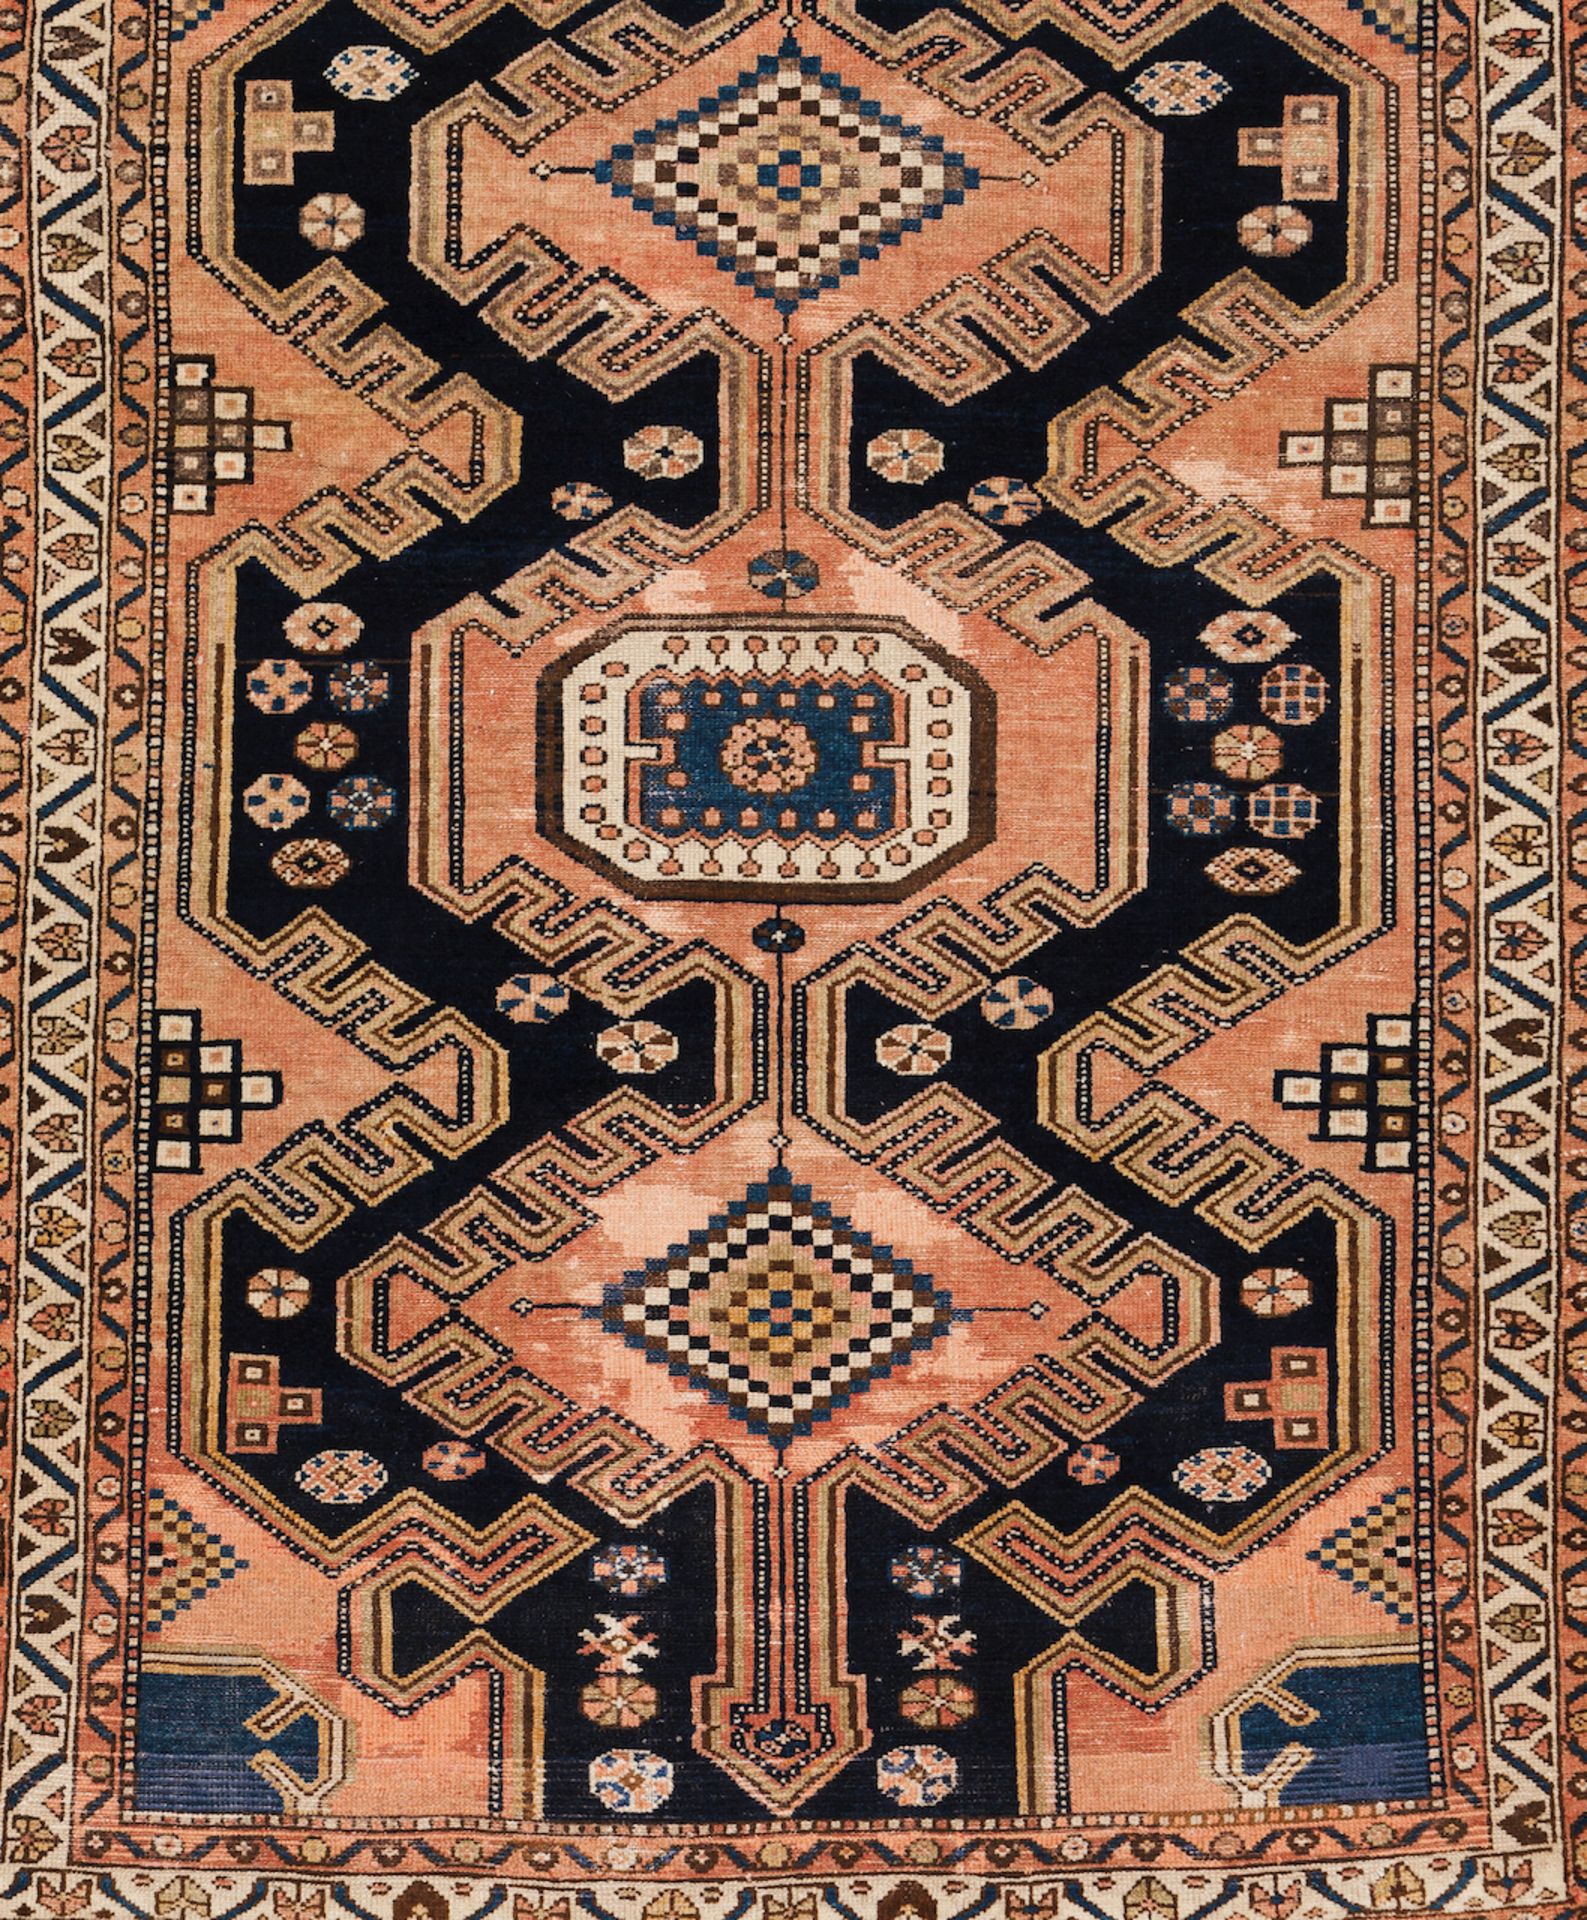 A Malayer rug, IranWool and cotton of floral and geometric pattern in blue, salmon and beige